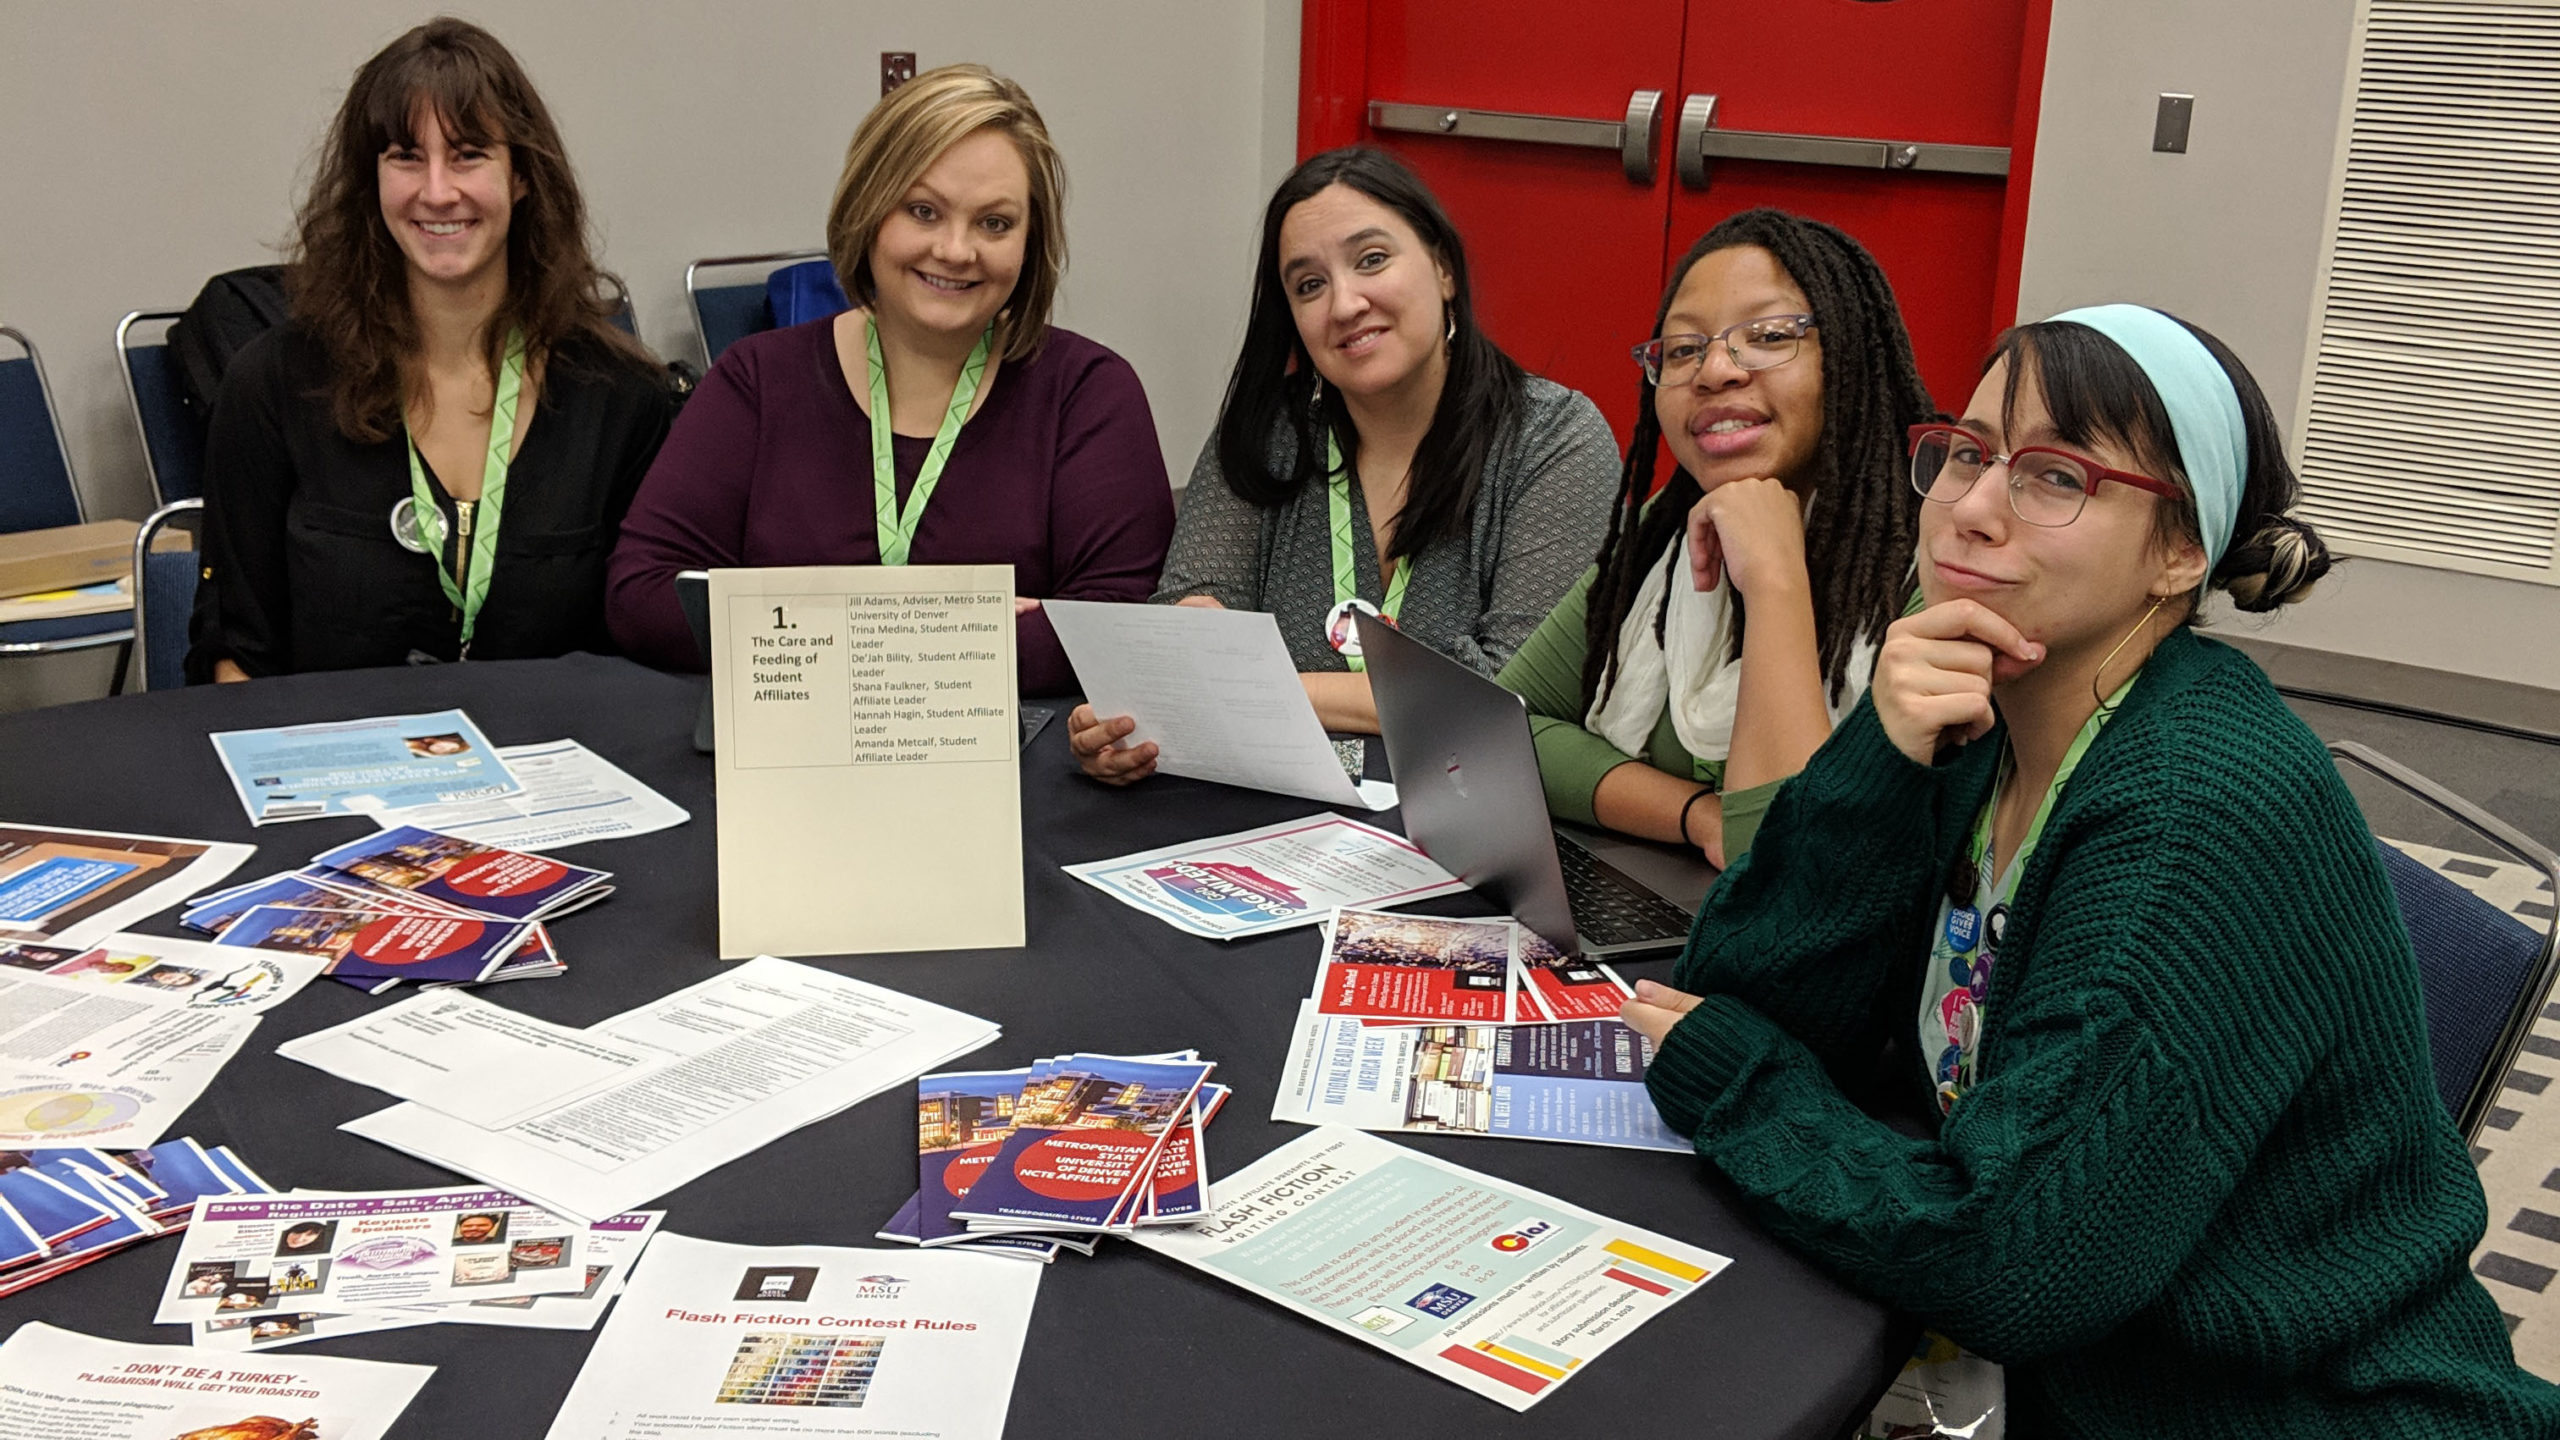 Group of women at NCTE